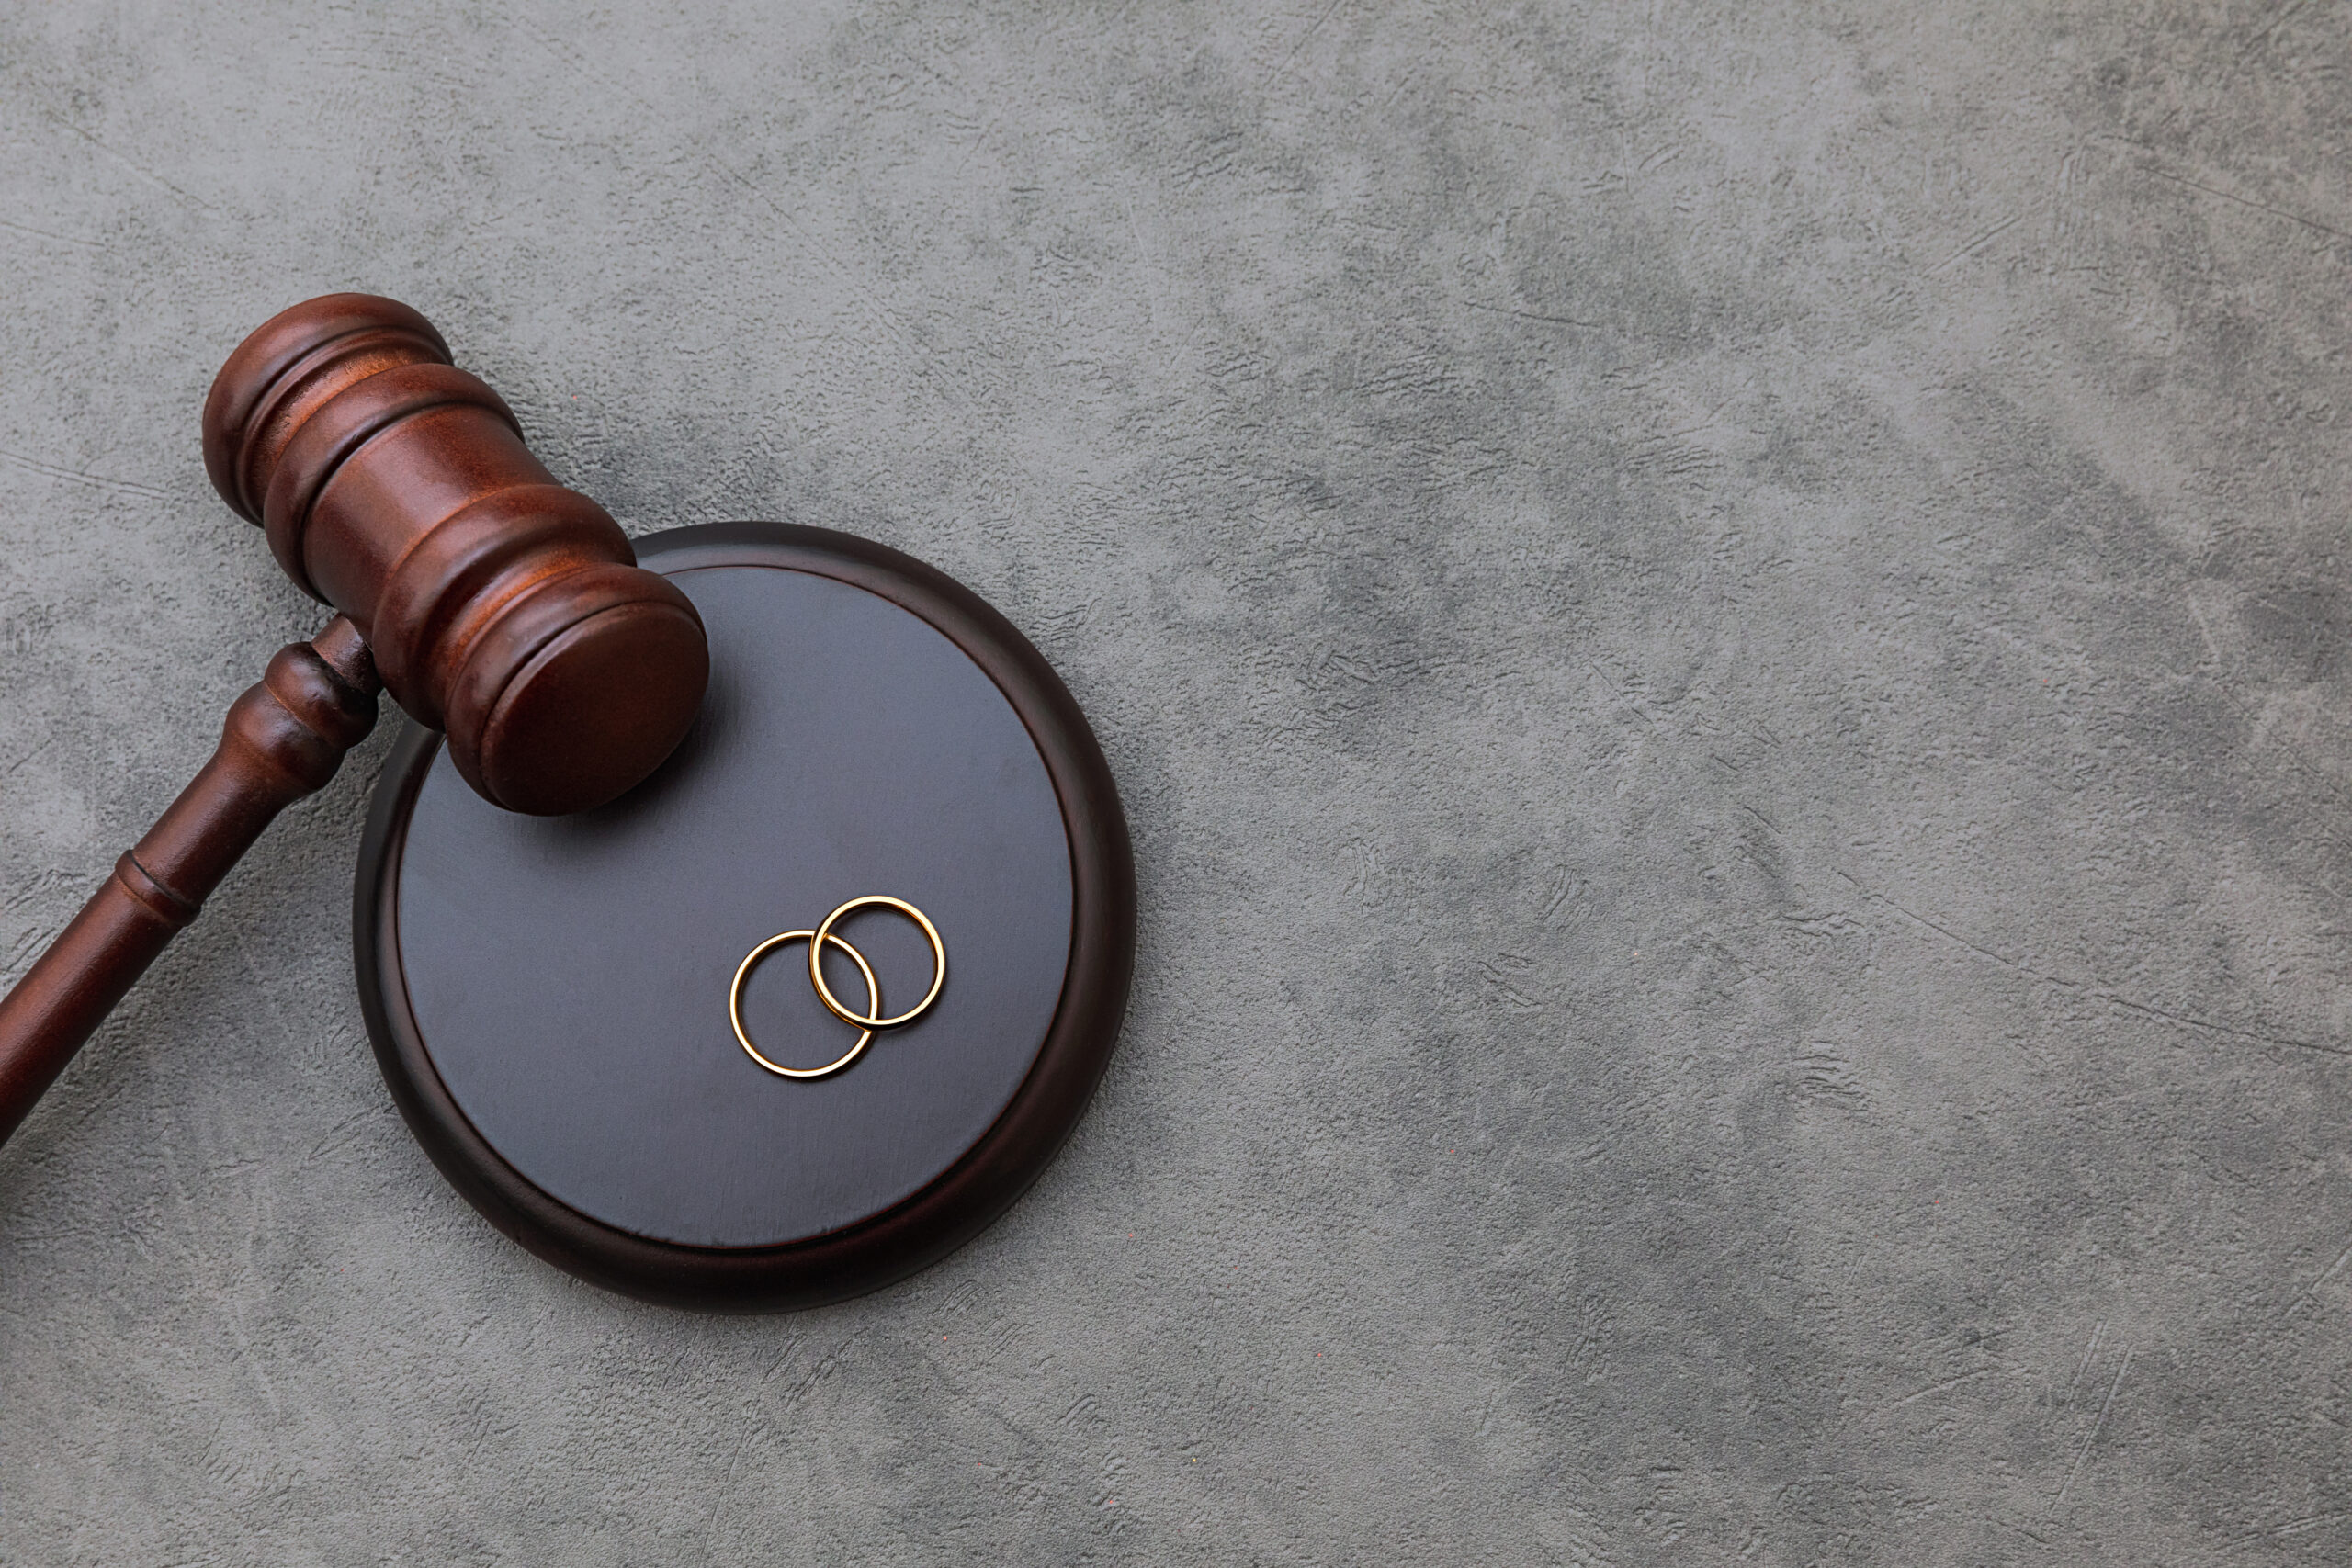 A wooden gavel rests on a round block next to two intertwined wedding rings on a gray surface, symbolizing legal aspects of marriage.